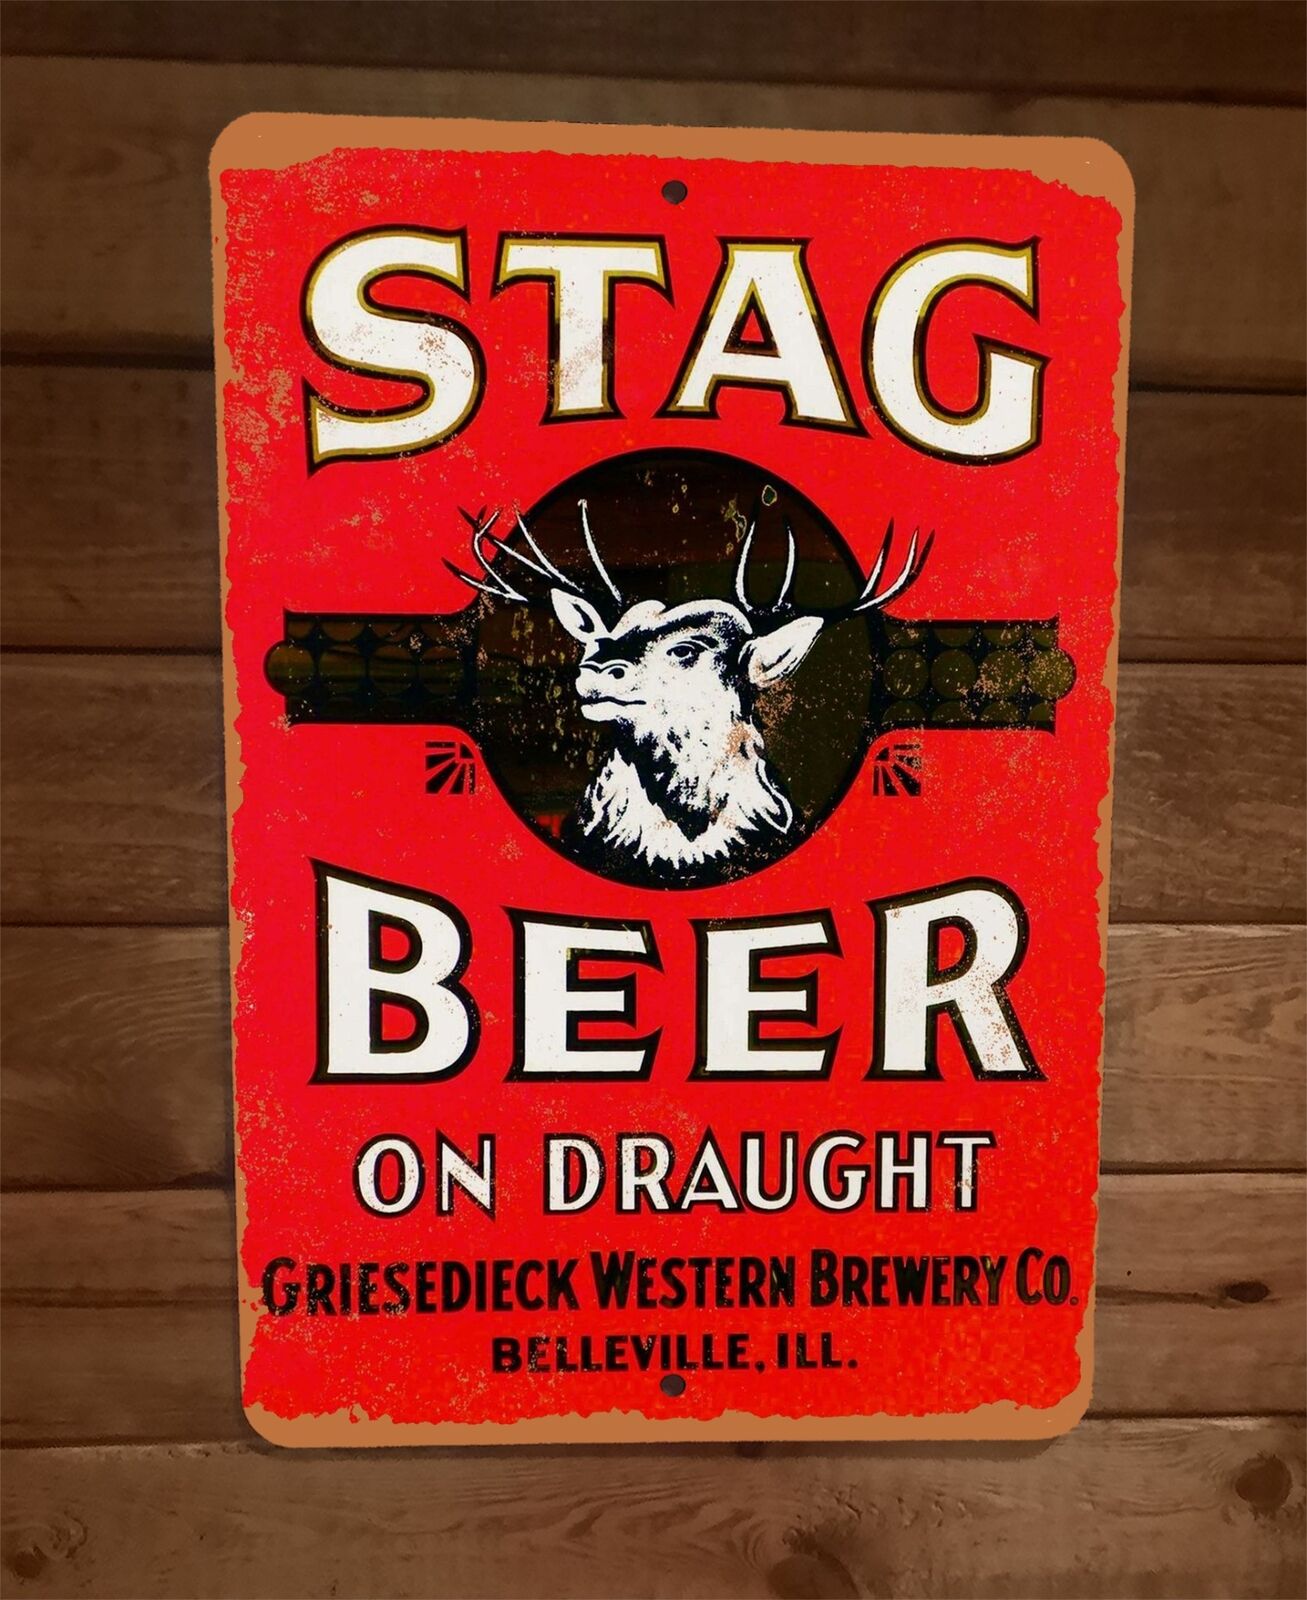 Stag Beer on Draught Vintage Ad 8x12 Metal Wall Bar Sign